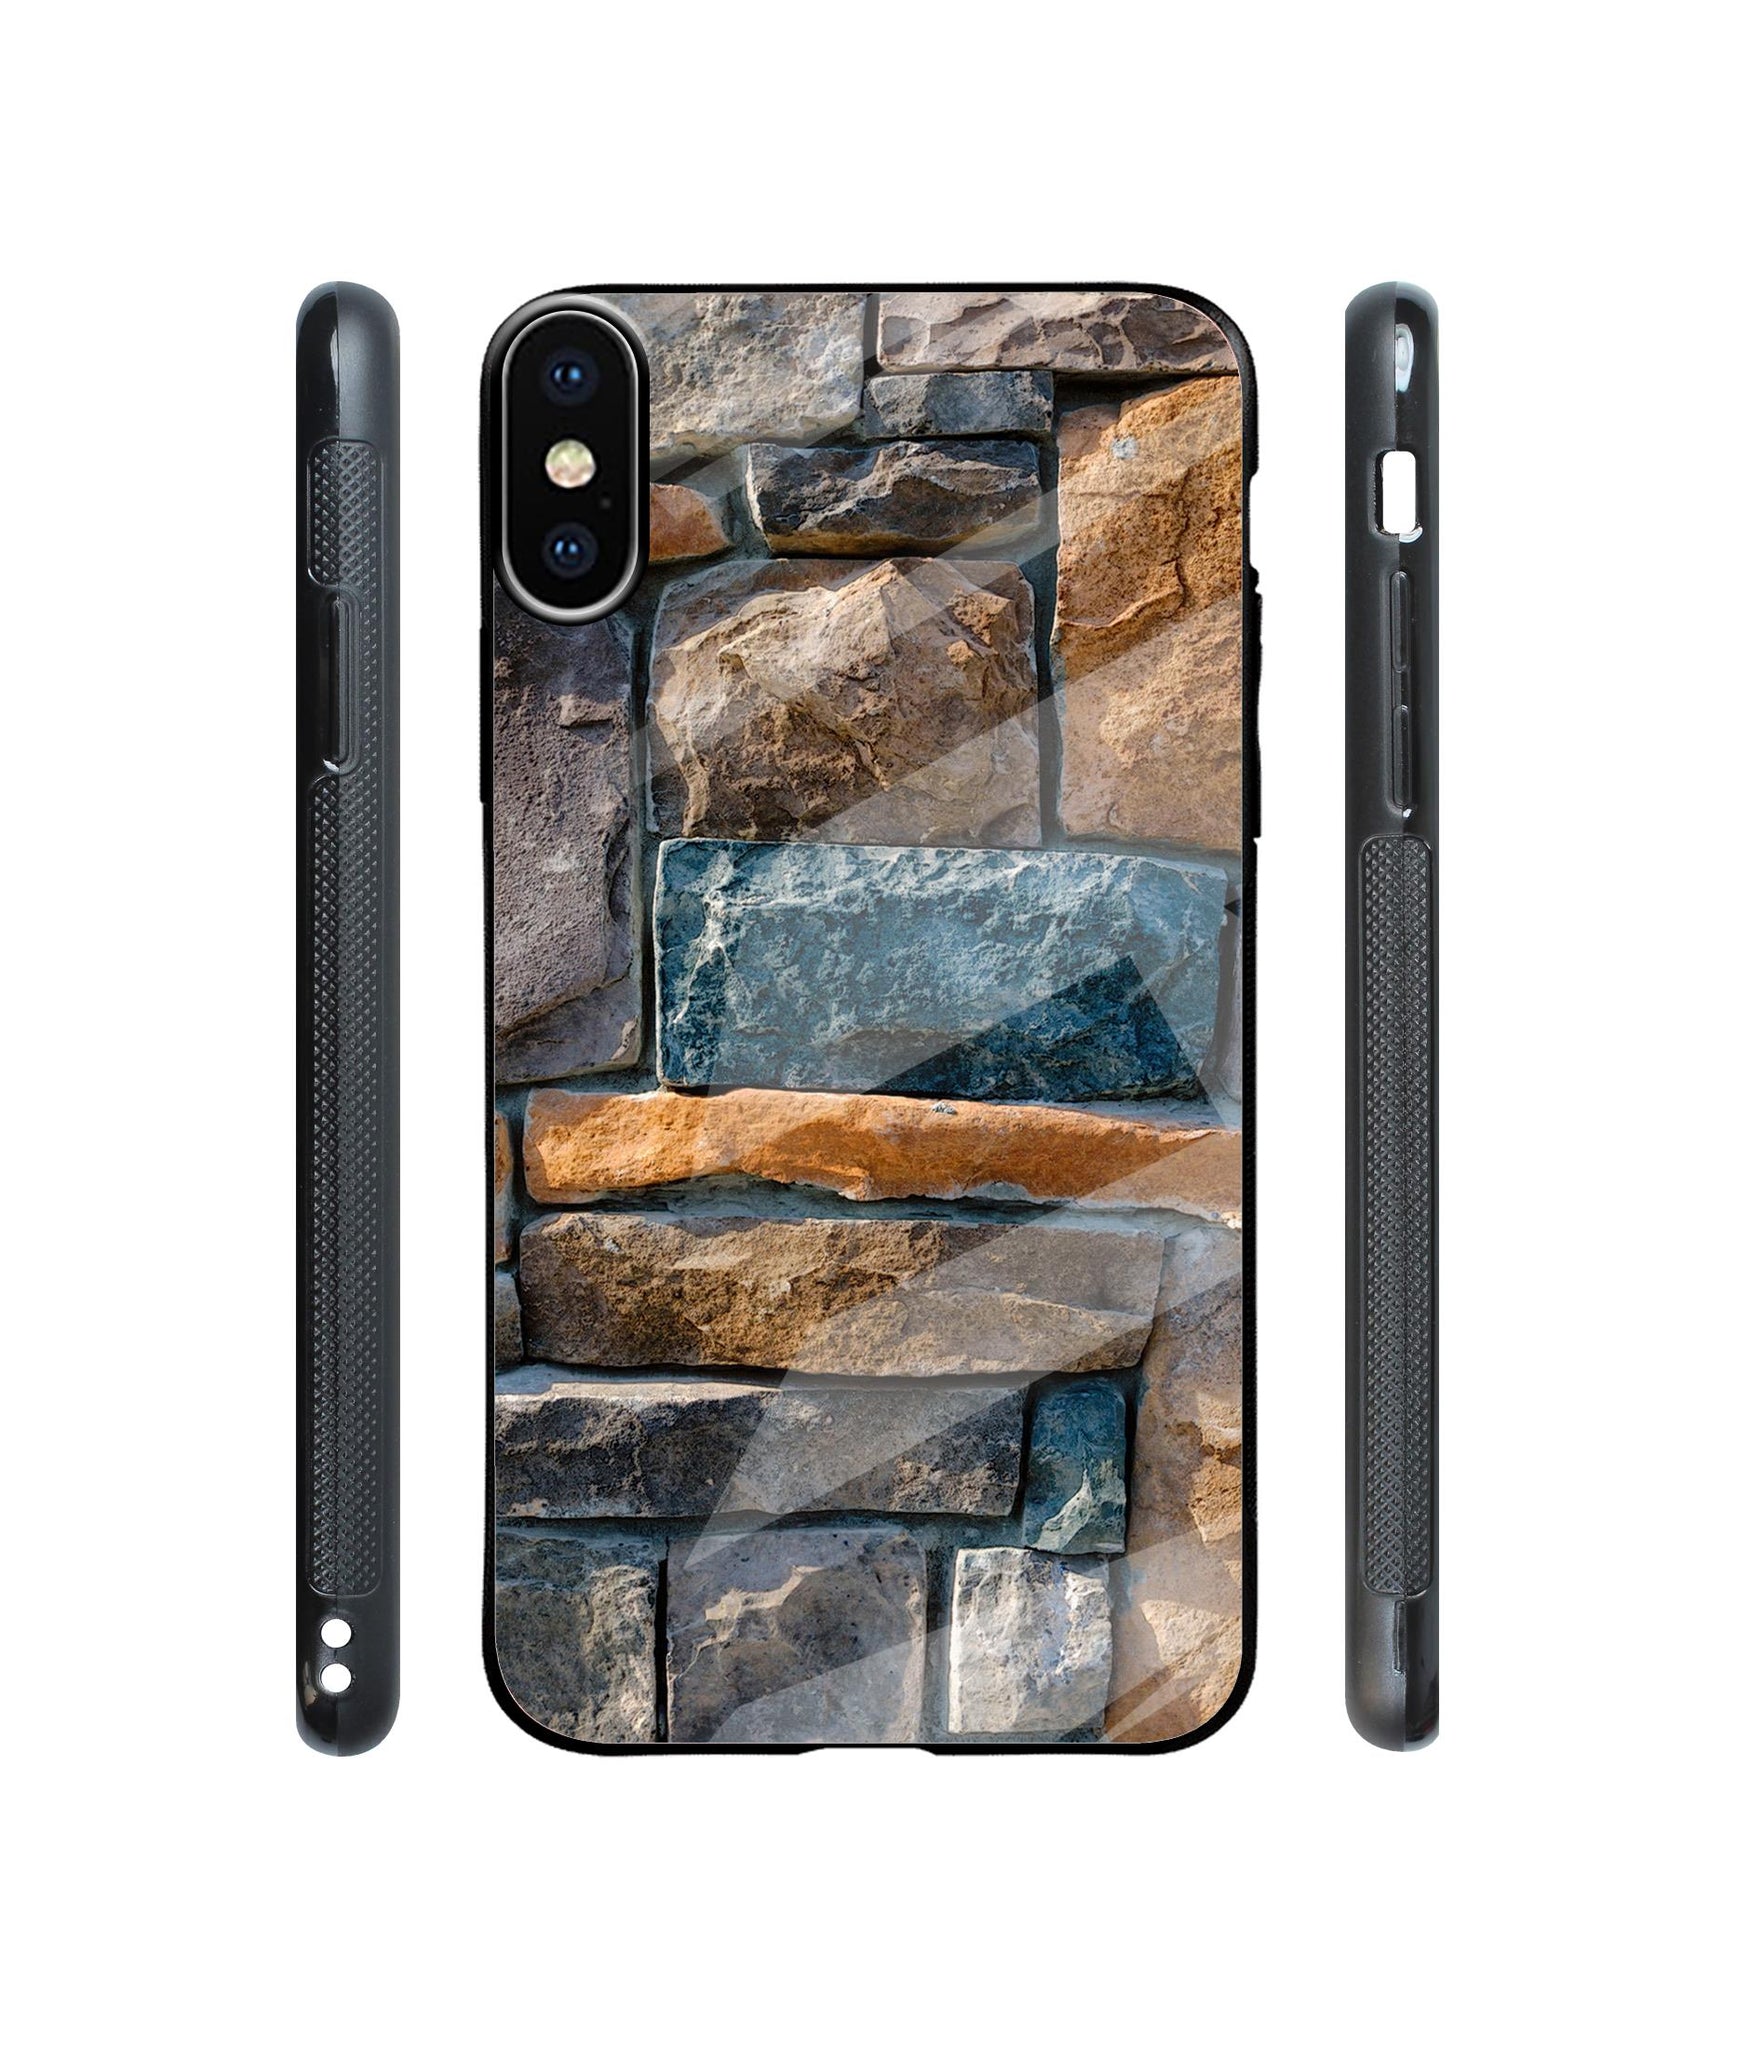 Decorative Stone Cladding Designer Printed Glass Cover for Apple iPhone X / Xs